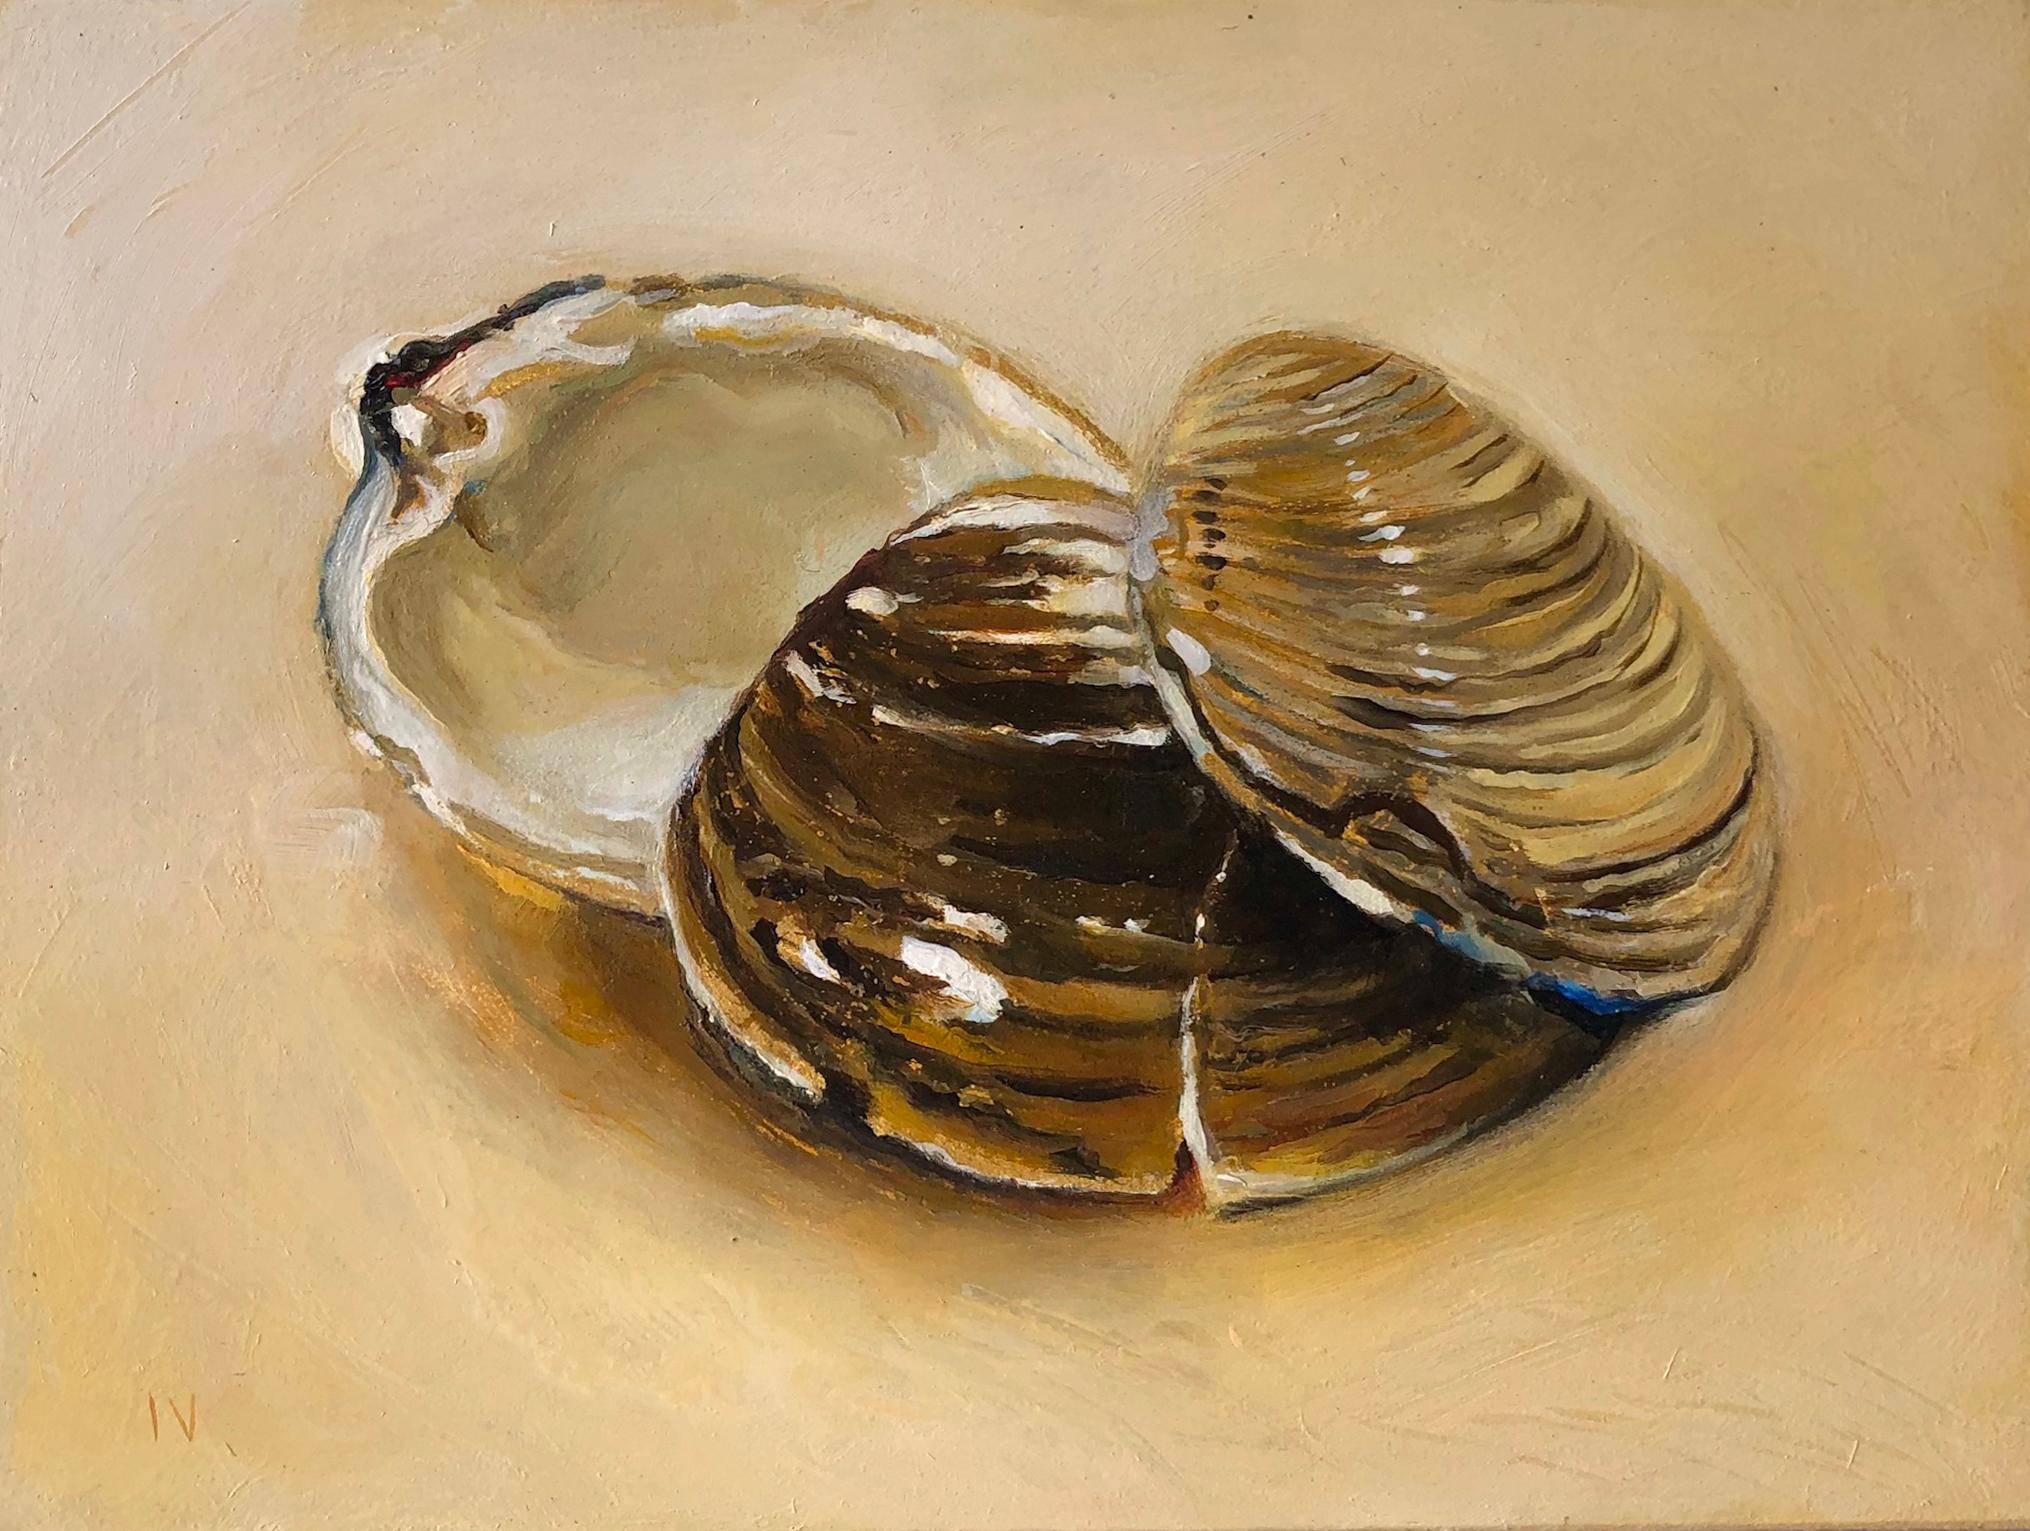 Clams #20 (Contemporary Realist Still Life in Oil of Clam Shell, Gold Leaf)